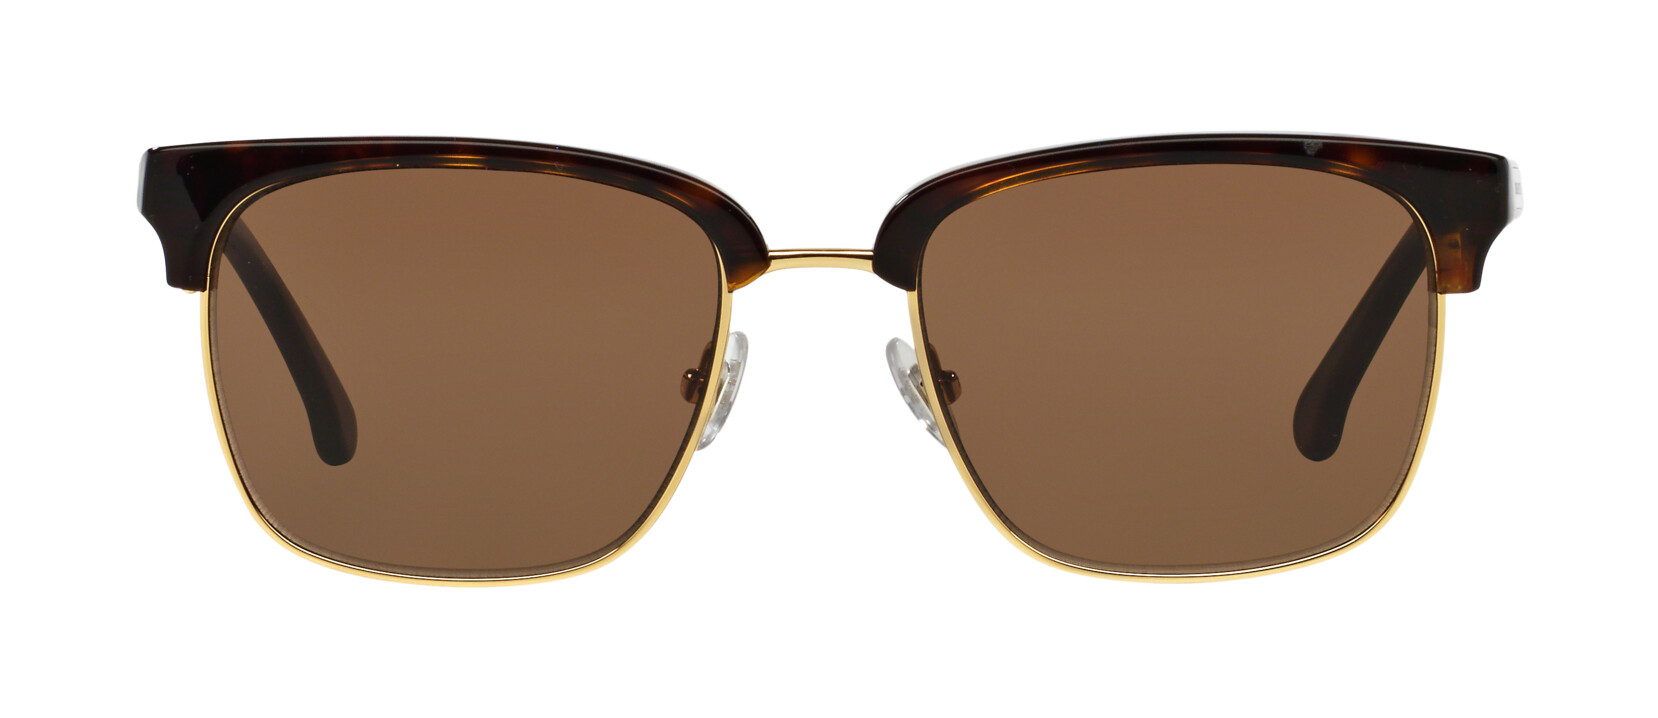 [products.image.front] Brooks Brothers 0BB4021 600173 Sonnenbrille